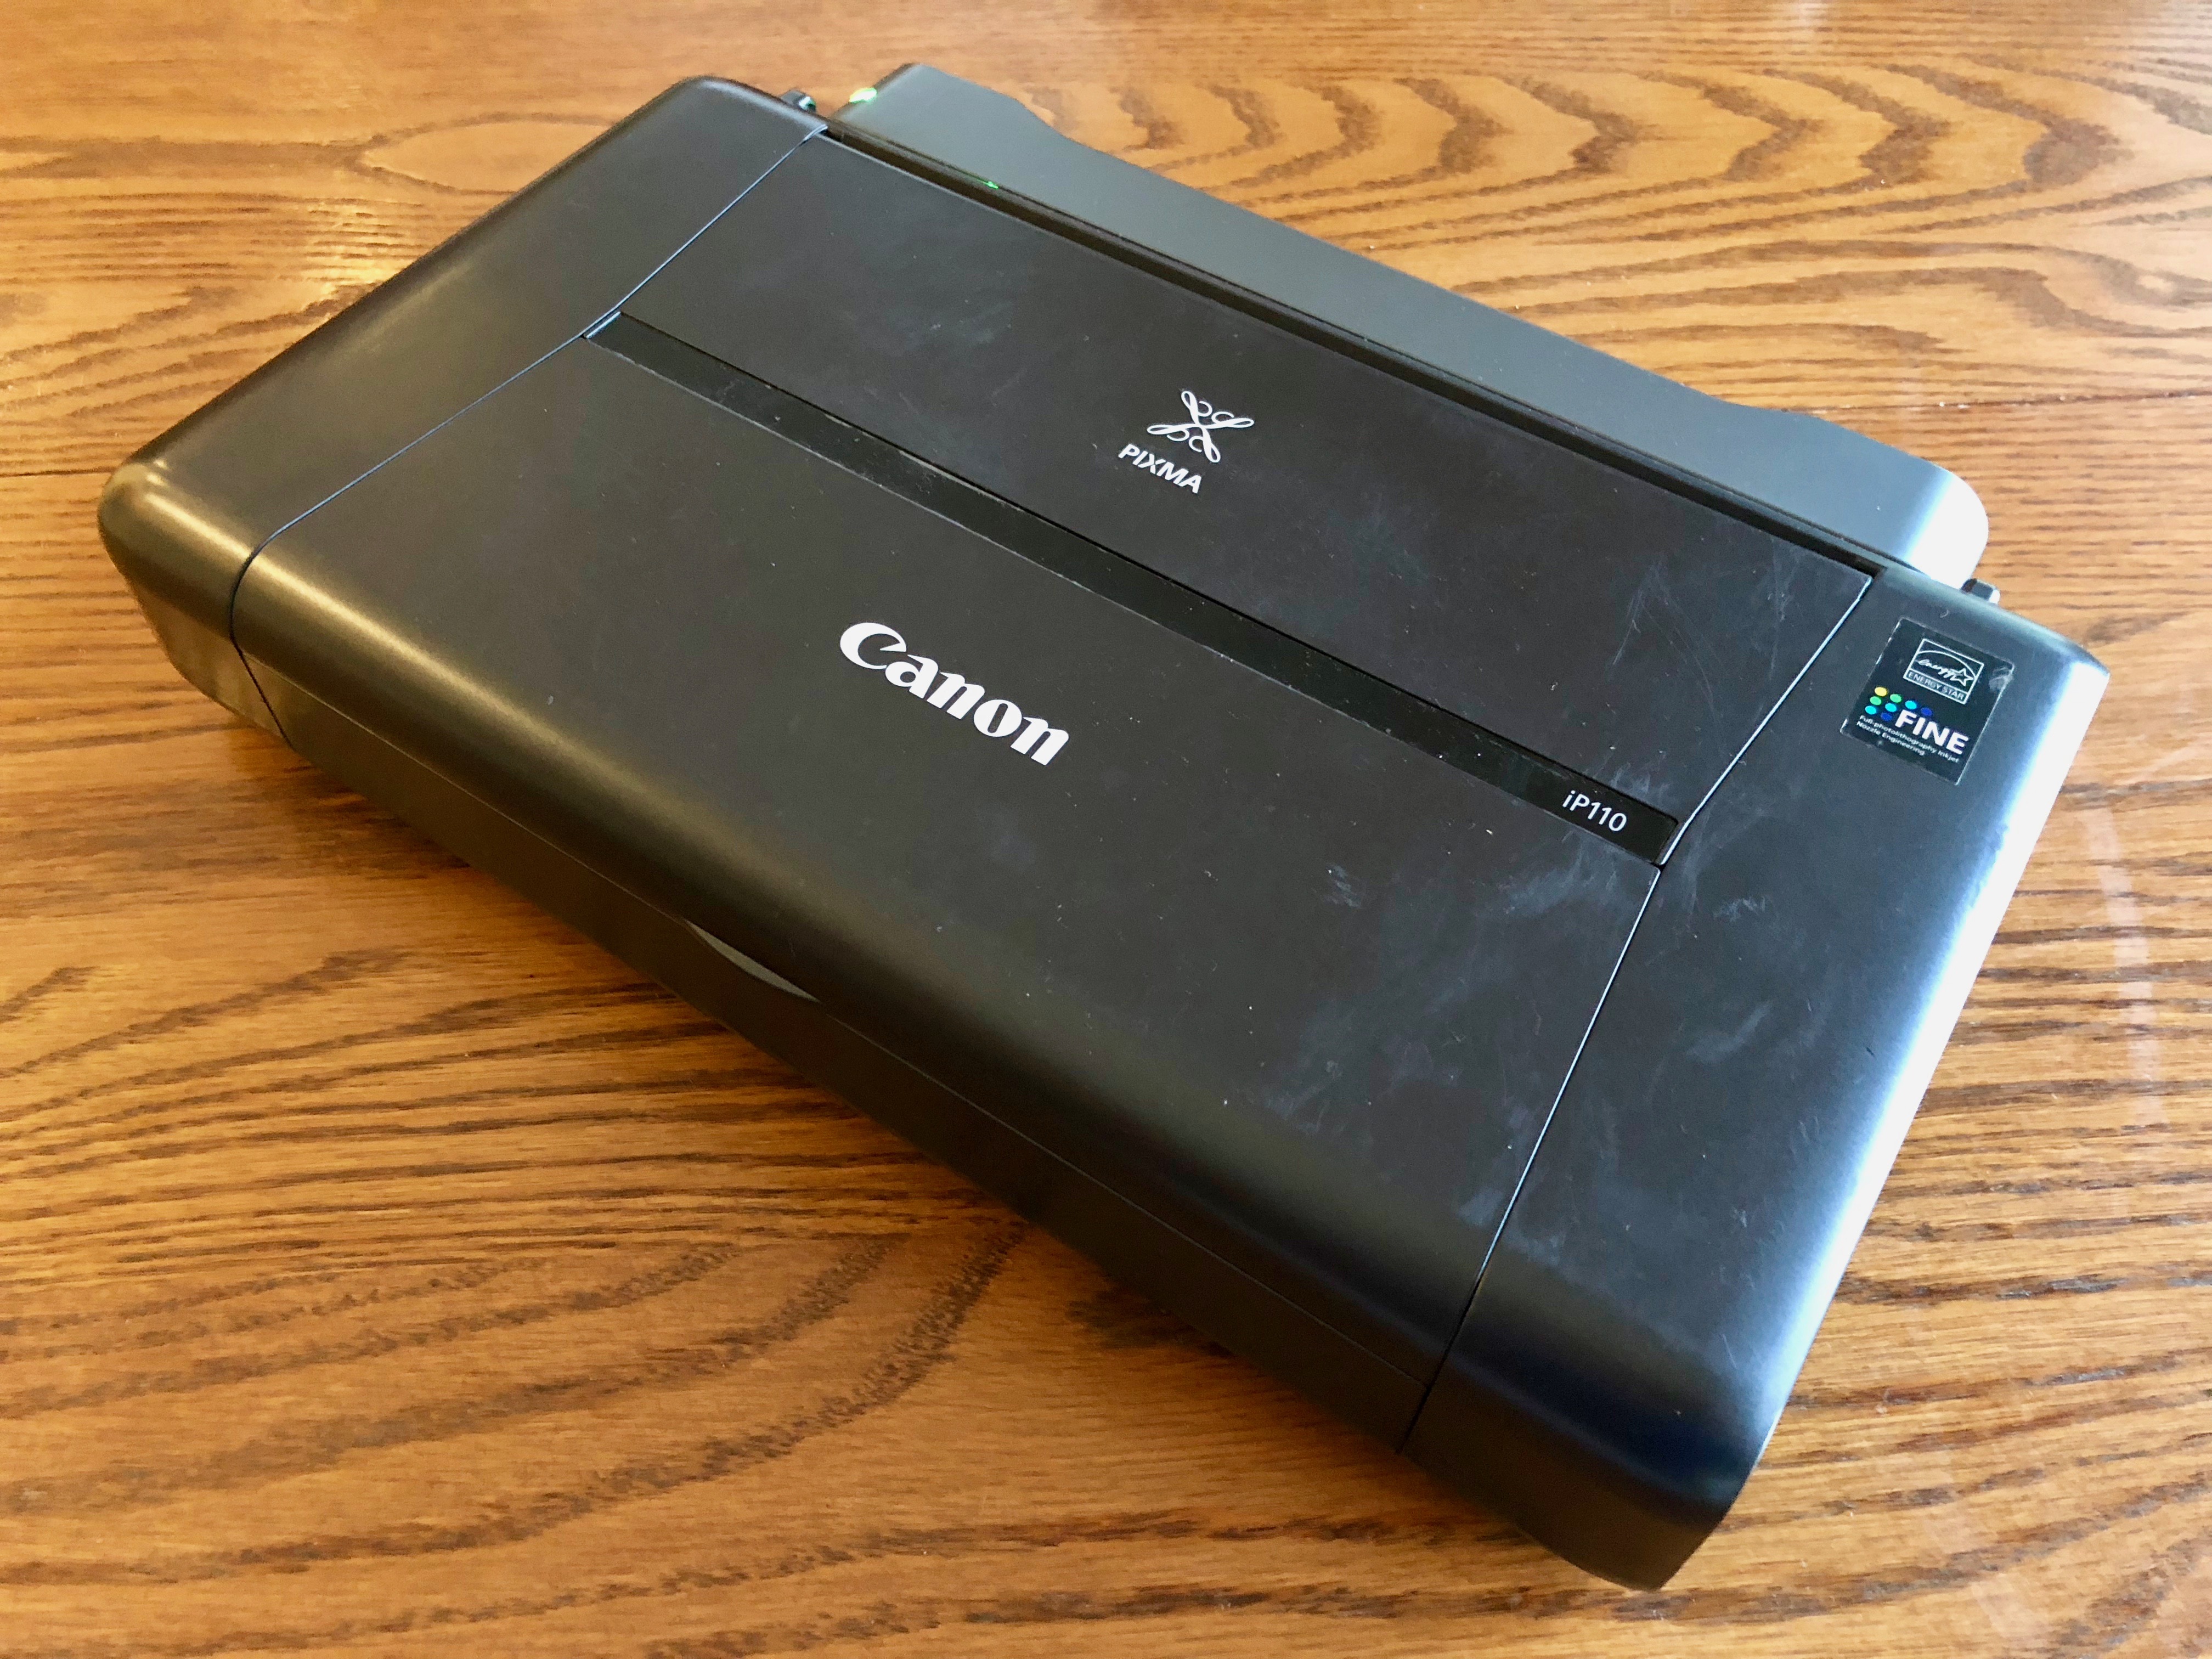 Canon Pixma iP110: Printing Without Wires - TidBITS